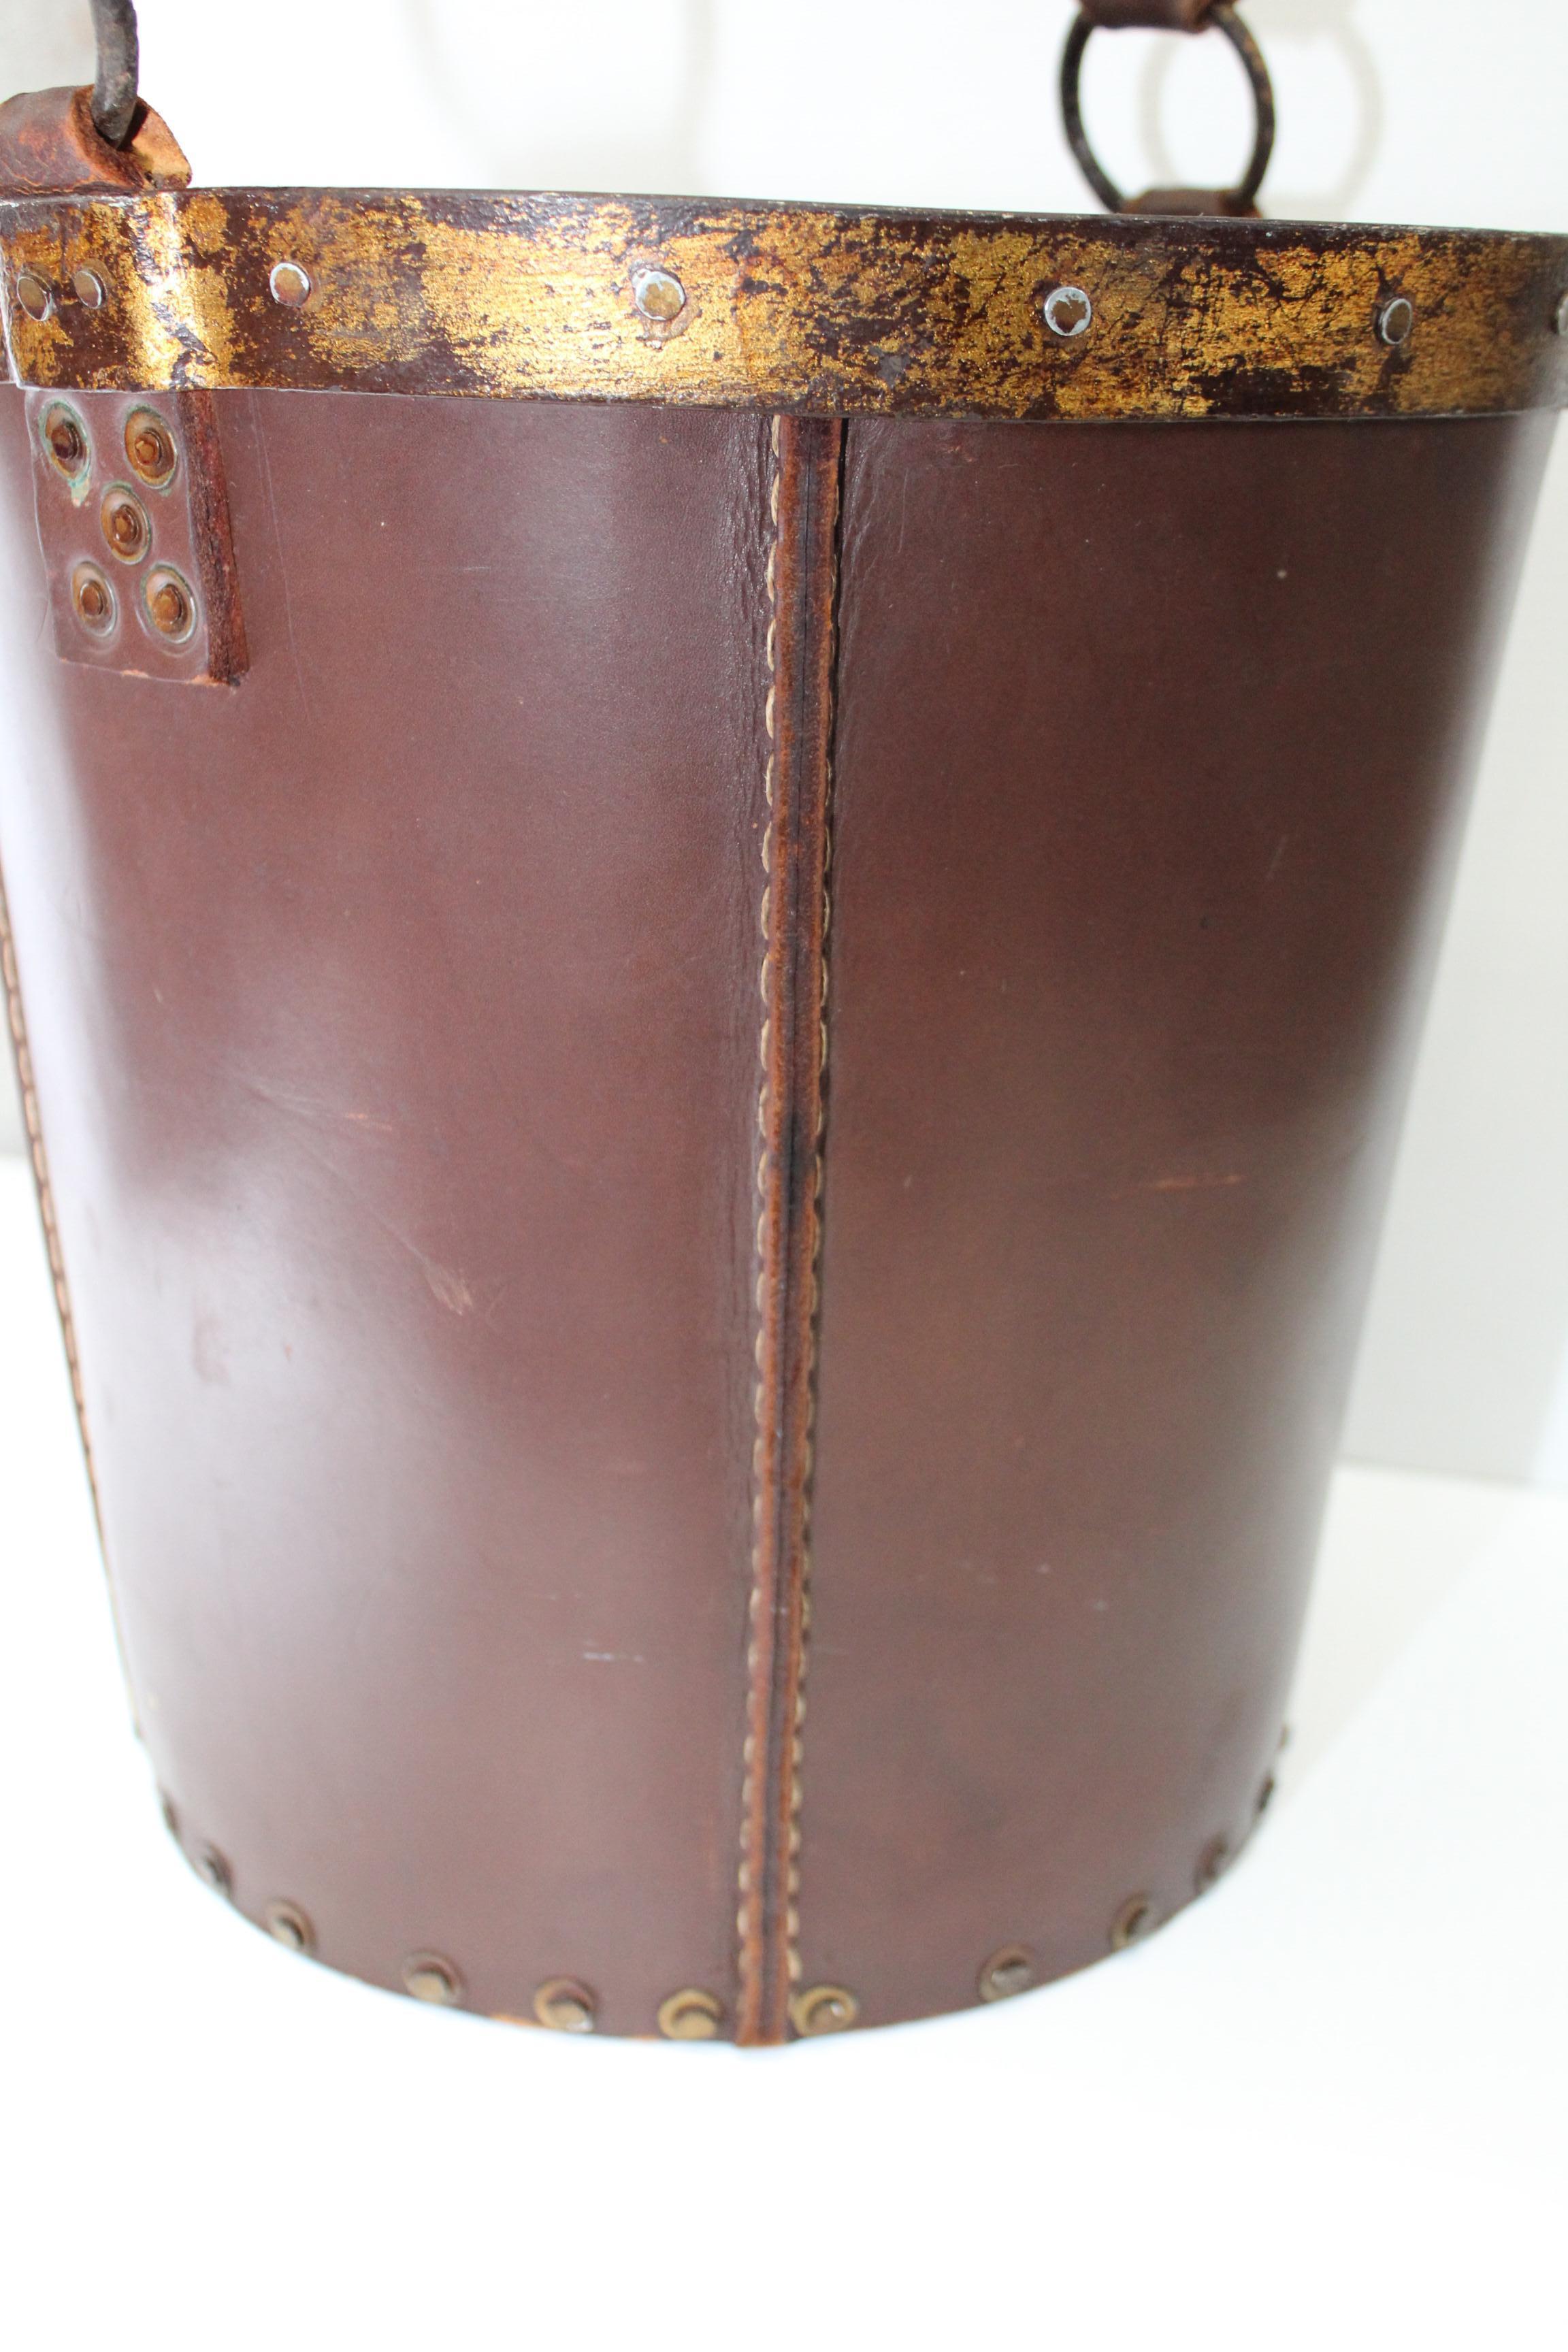 Metal 1940s Leather Waste Basket from Spain